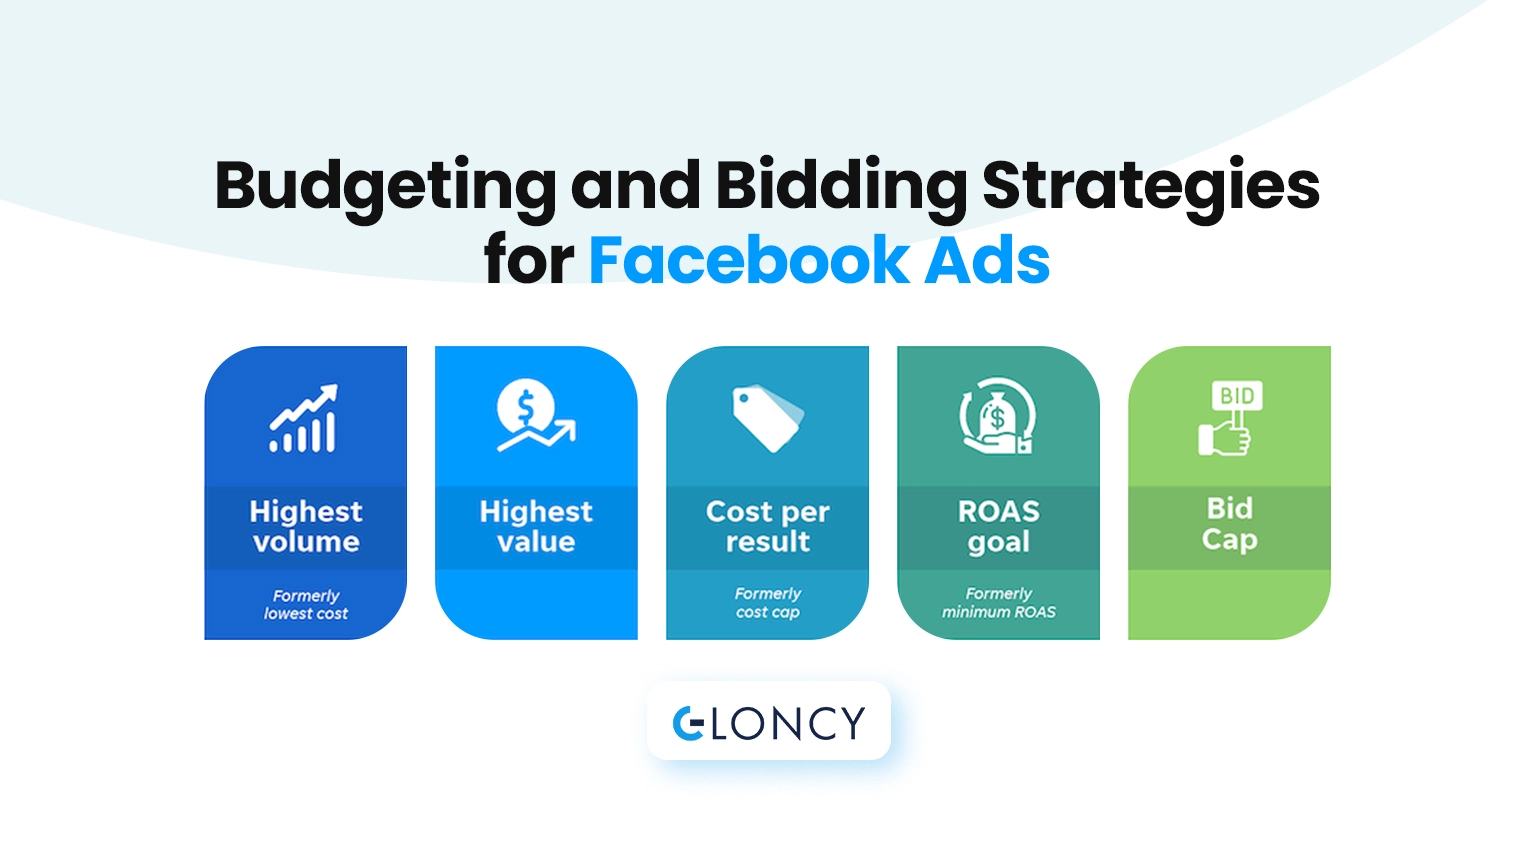 Facebook Ads Budgeting and Bidding Strategy